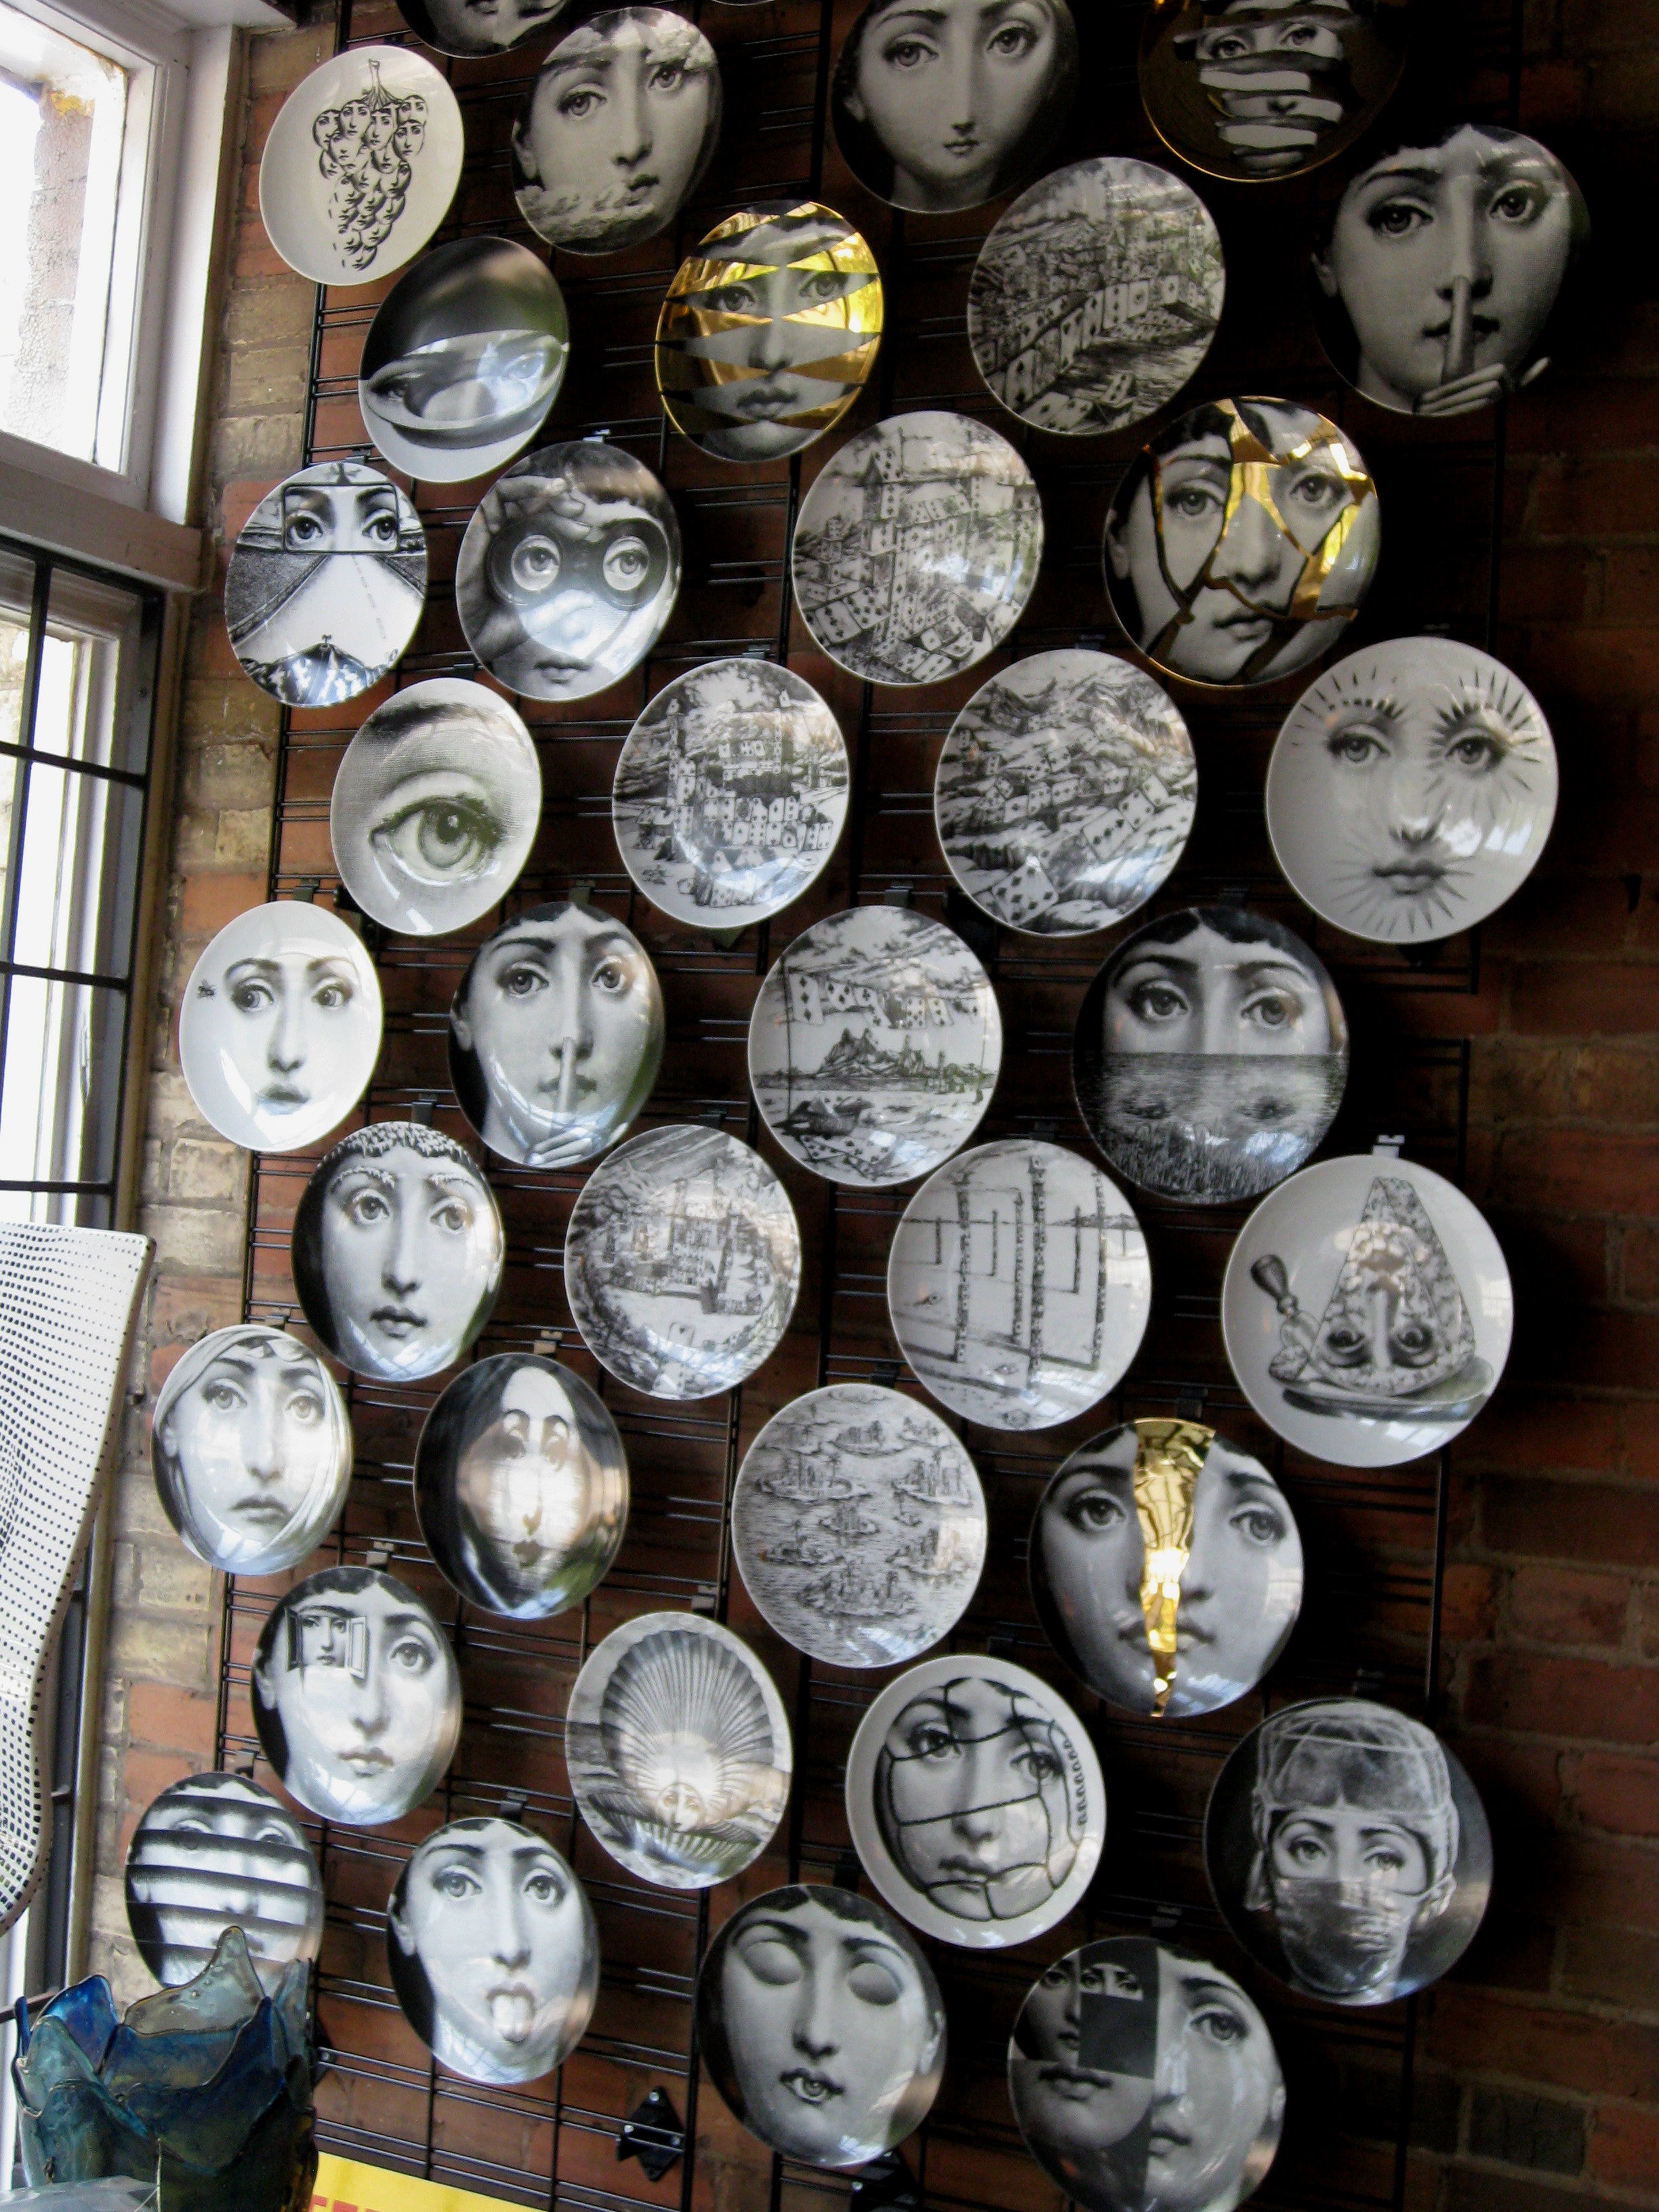 Fornasetti plate Theme & Variations series no 187